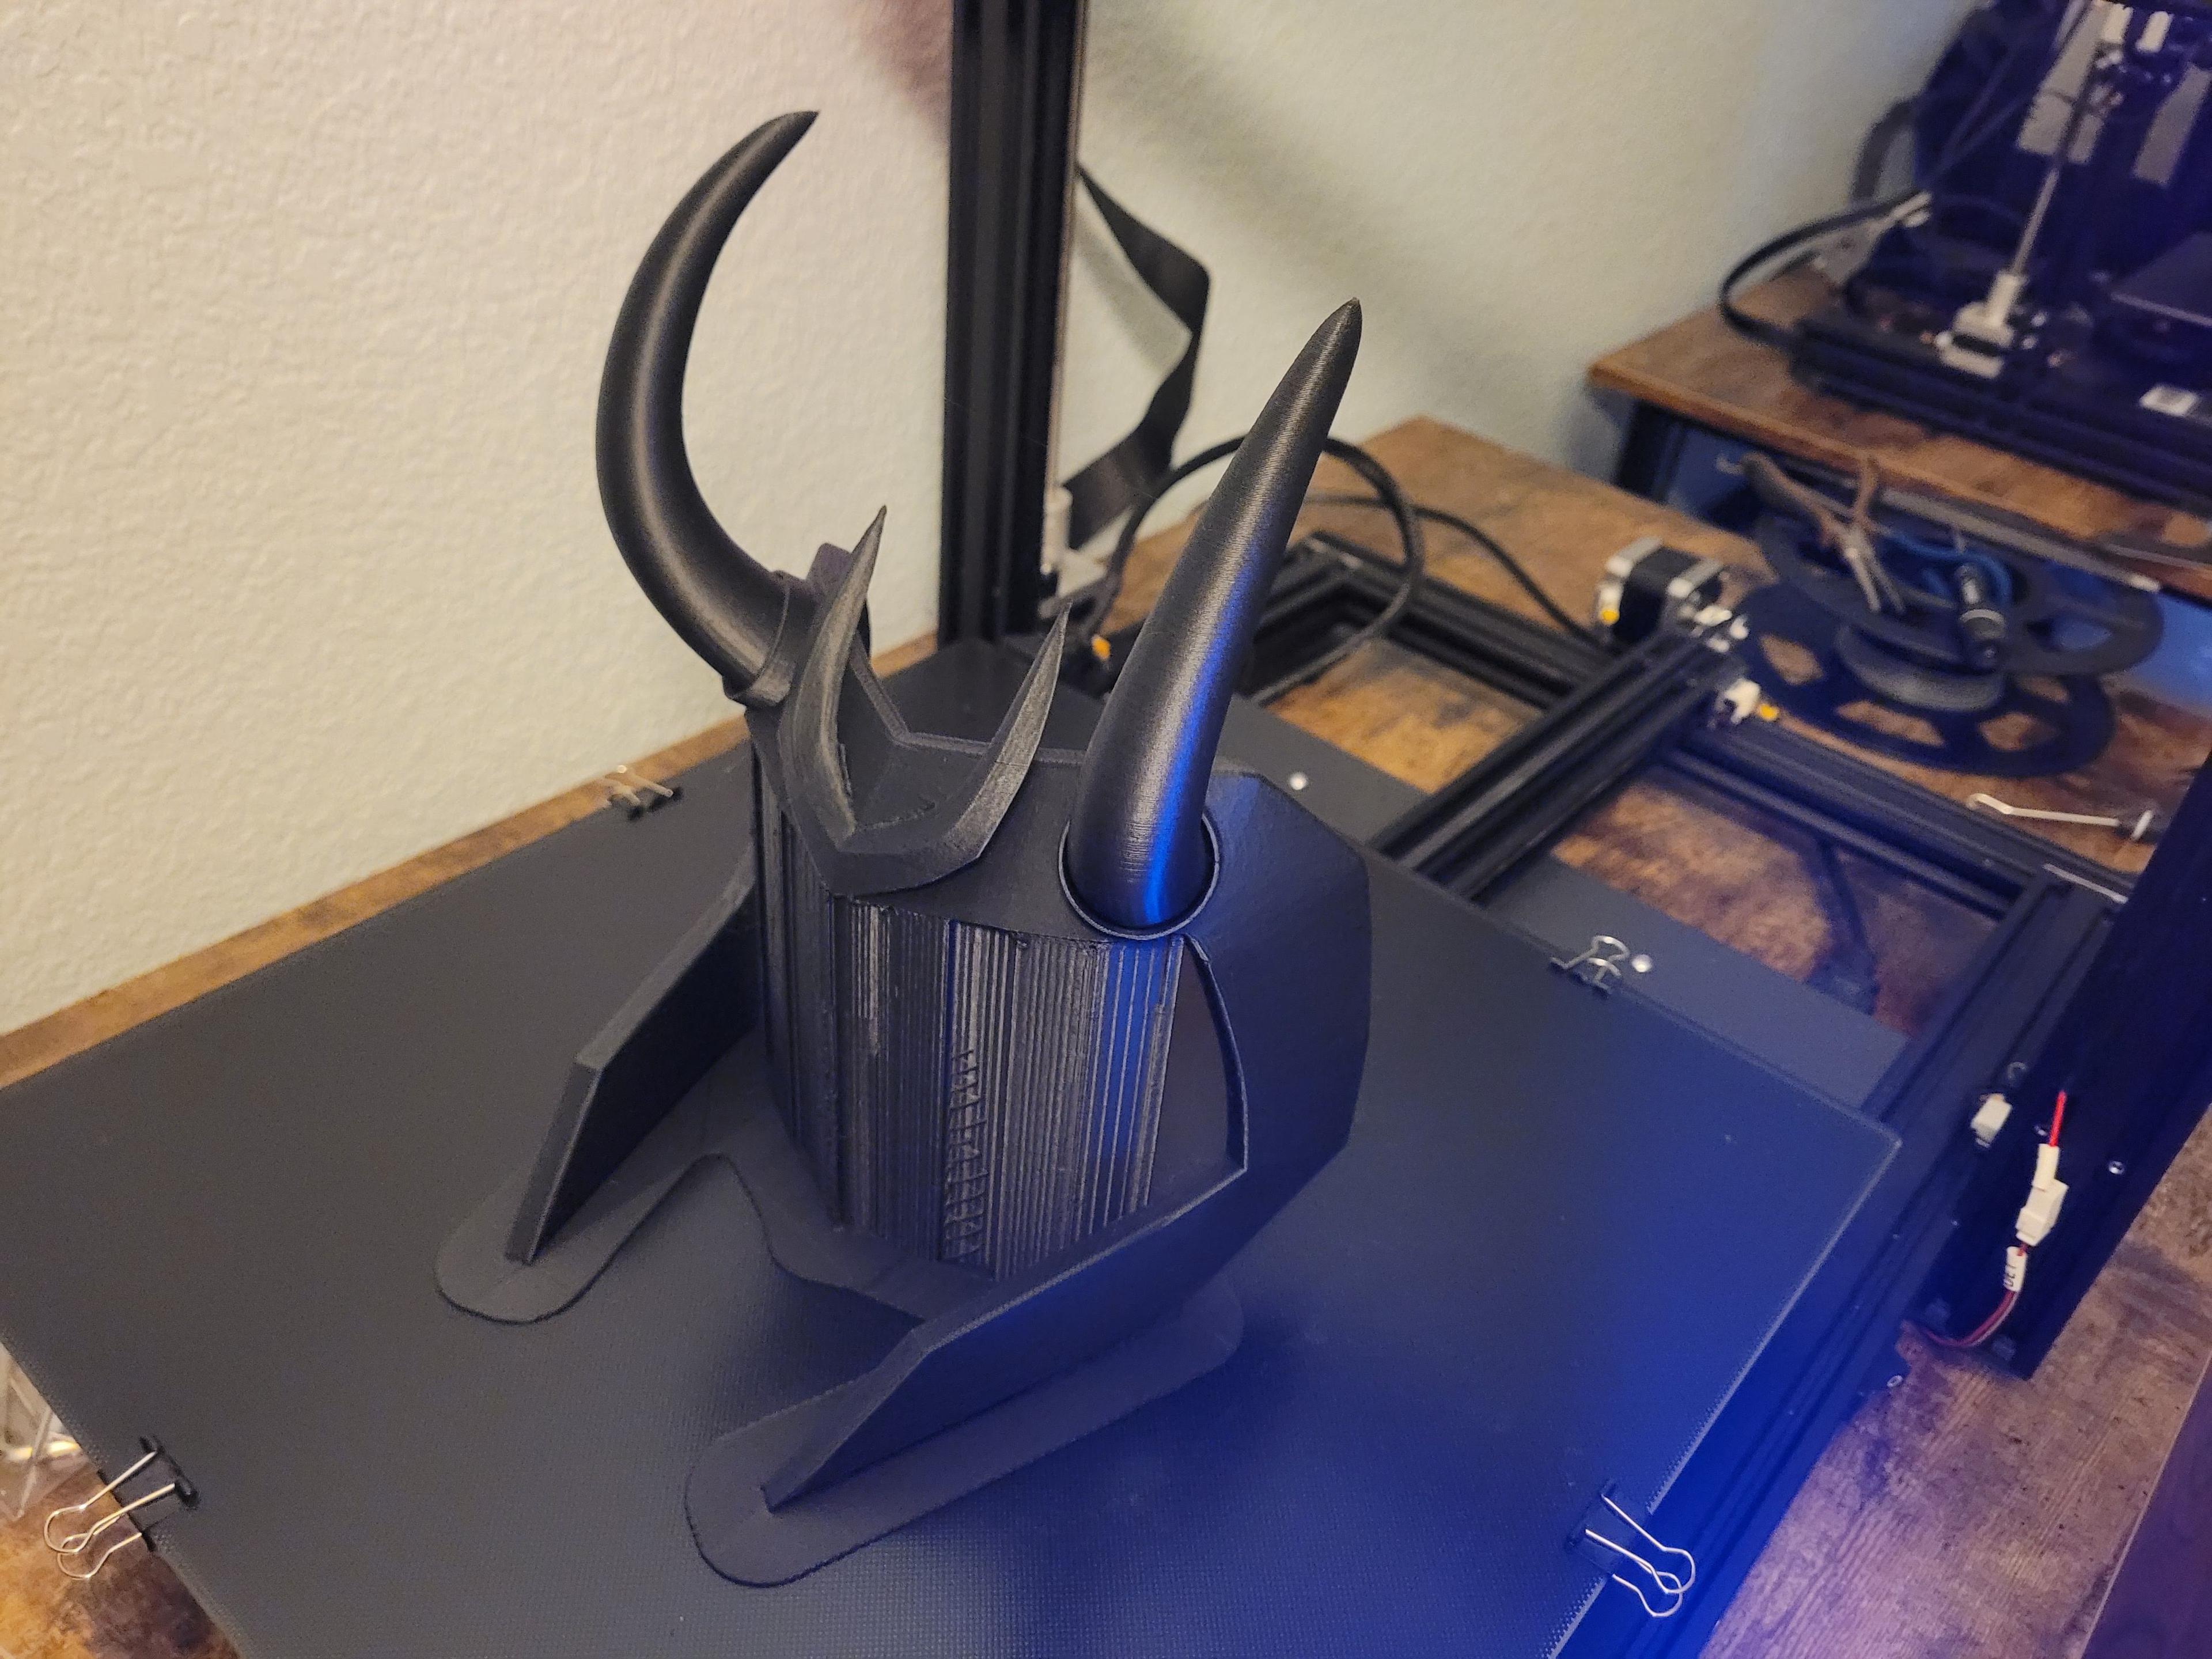 Loki Headpiece - Printed at 100% scale.

Printed on a Sovol SV03
Resolution/Layer Height: 0.2
Infill Density: 5%
Supports: 3% infill
Support Overhand Angle: 70 Degrees

The picture shows how the print after it was completed. No supports had been removed yet, and the orientation was left as it was printed. 

It turned out great. I will upload post-processing photos at a later date.

 - 3d model